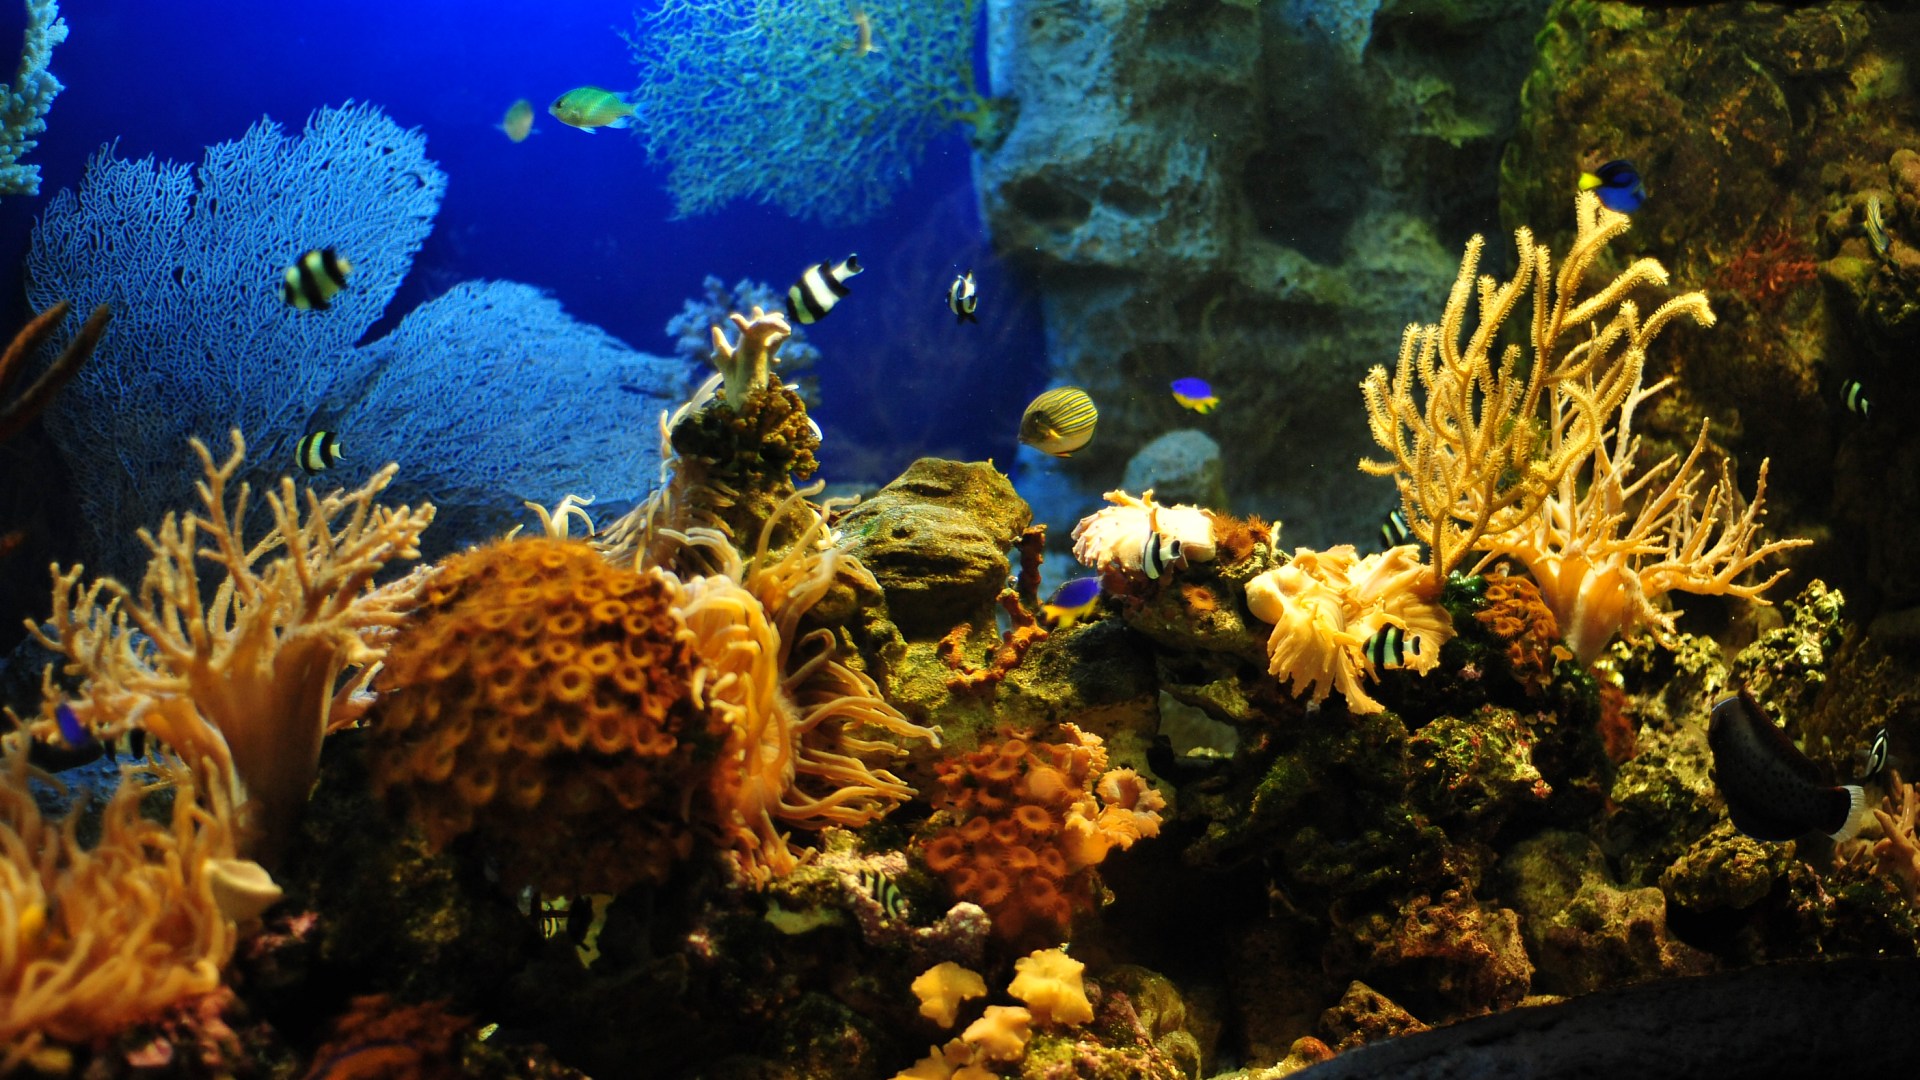 Free Fish Tank Wallpaper Widescreen photos of Which One to Choose